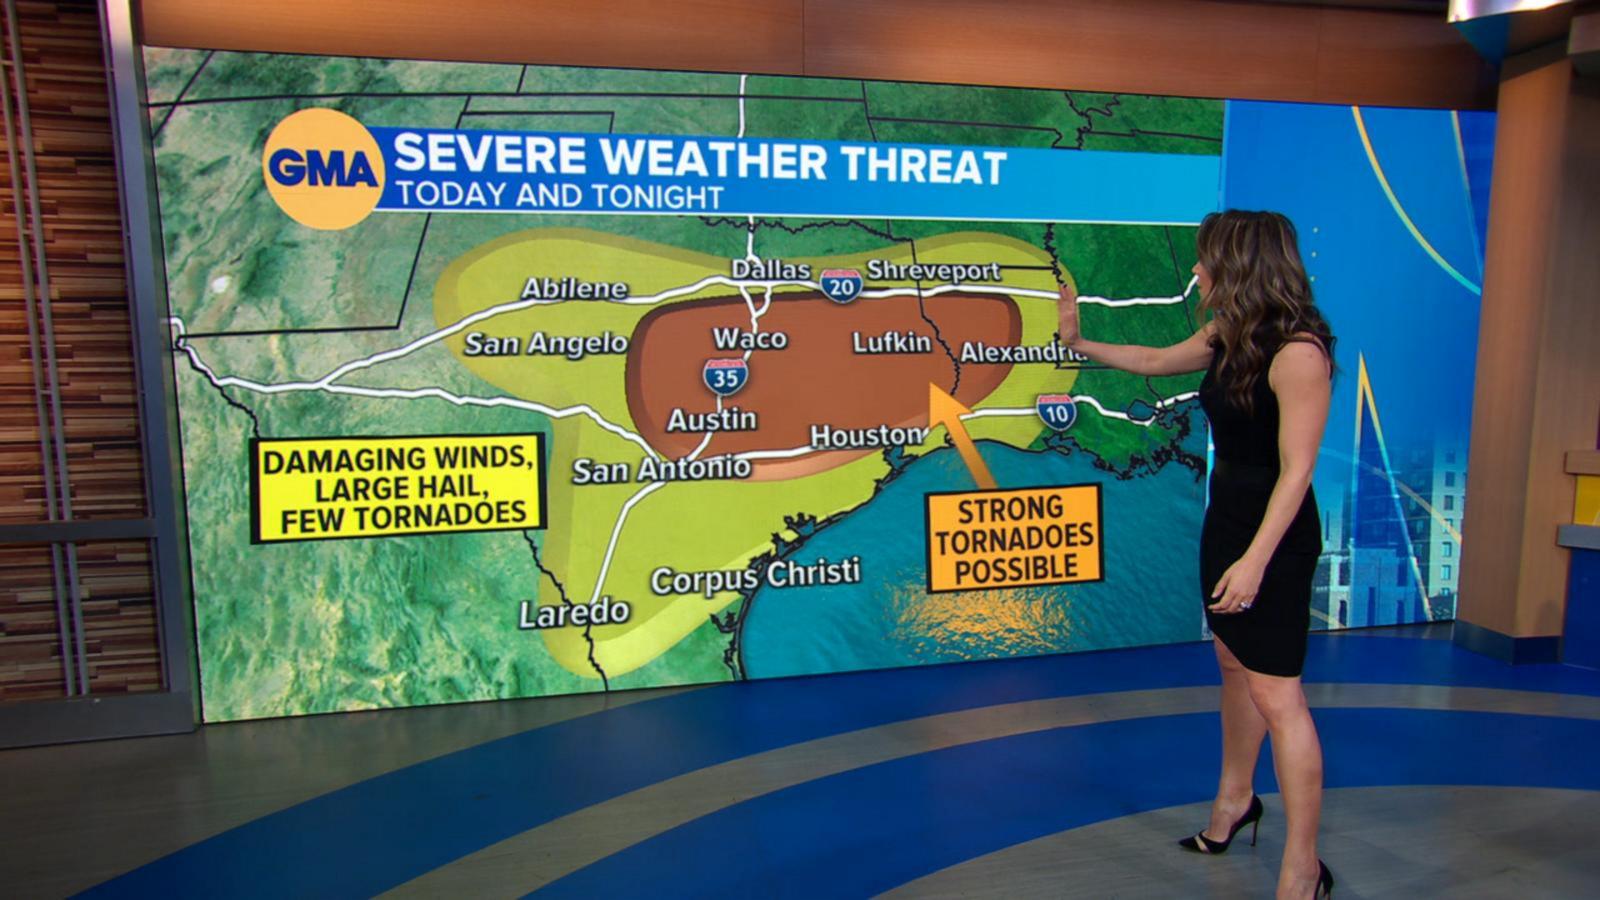 VIDEO: Severe weather hits South